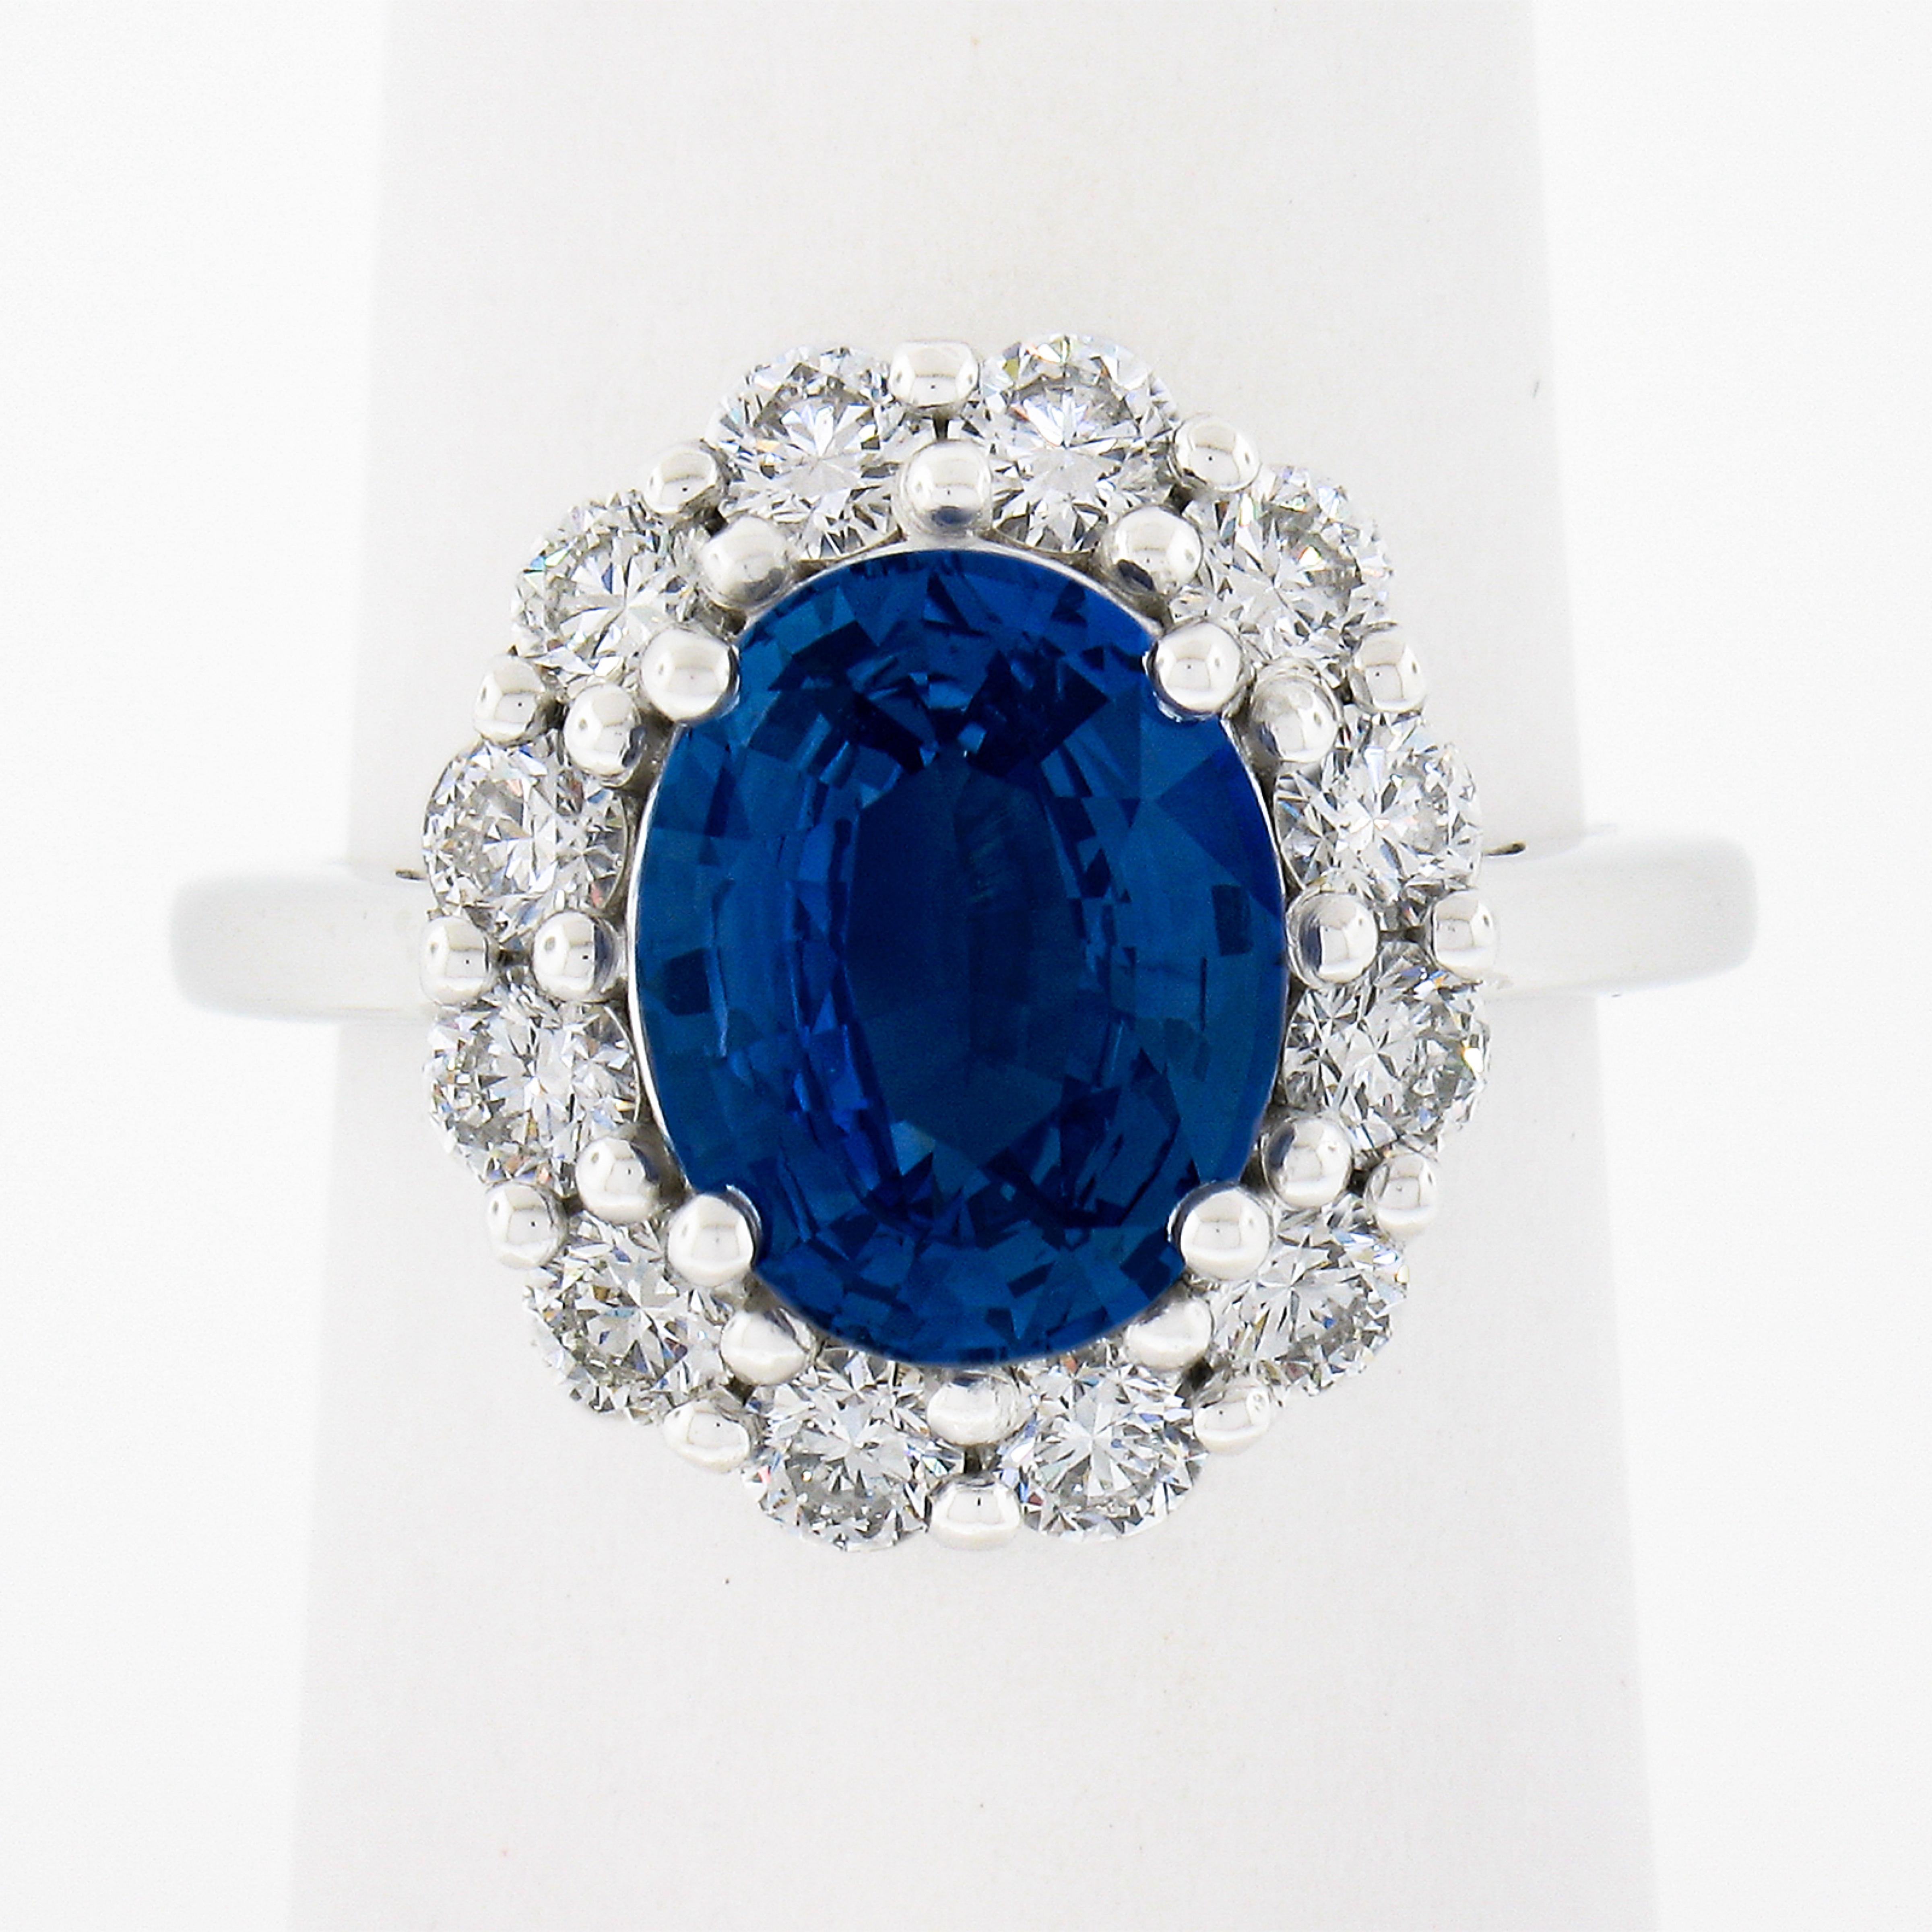 This stunning Princess Diana design engagement/cocktail ring is newly crafted in solid platinum. It features a mesmerizing and vibrant oval blue sapphire solitaire at its center which has been certified by GIA as weighing exactly 3.54 carats and